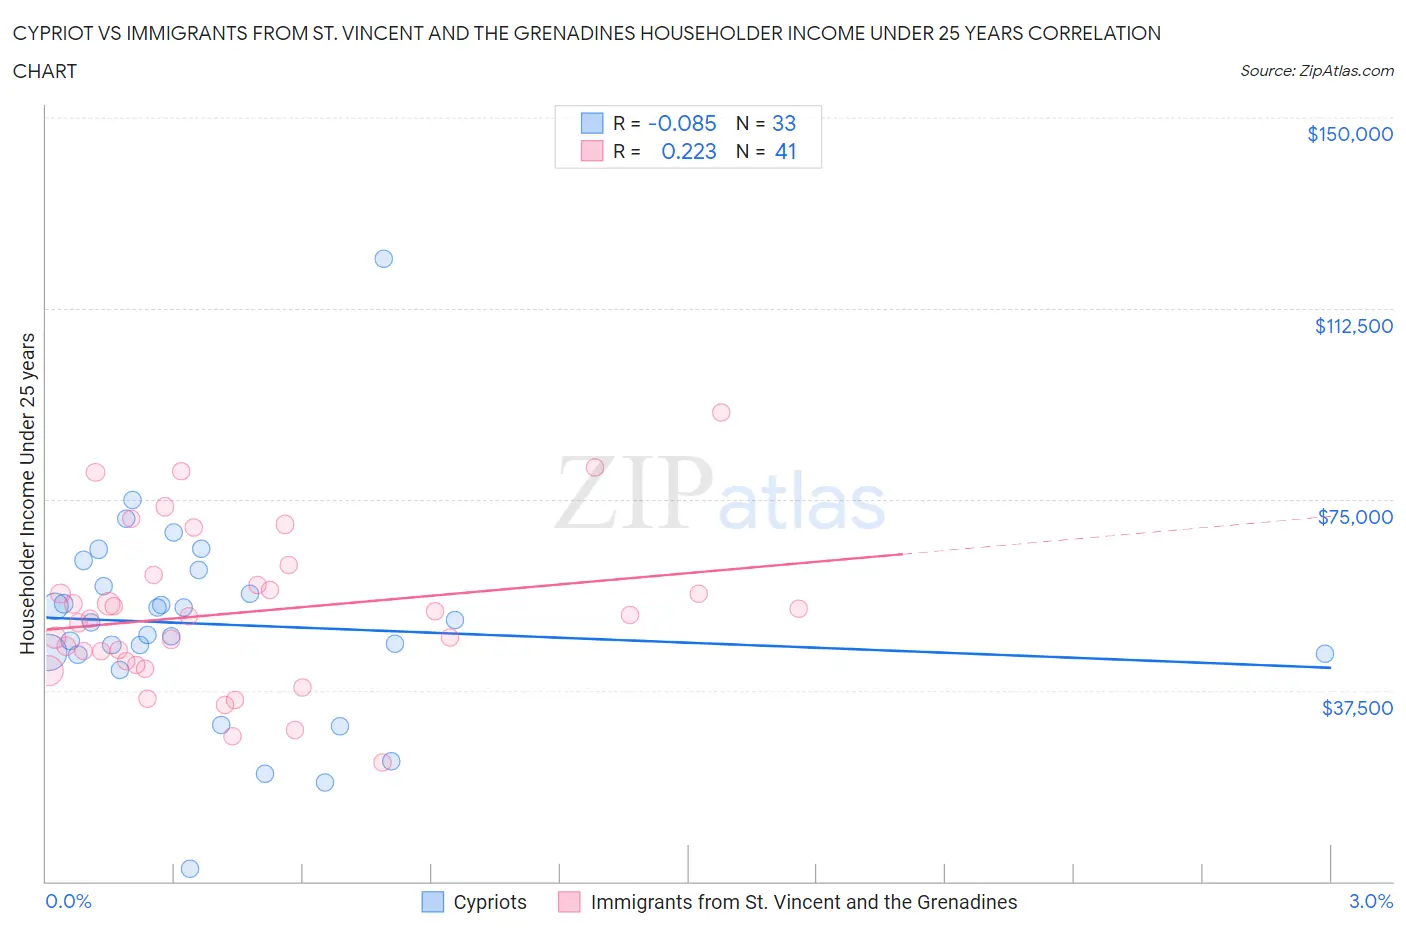 Cypriot vs Immigrants from St. Vincent and the Grenadines Householder Income Under 25 years